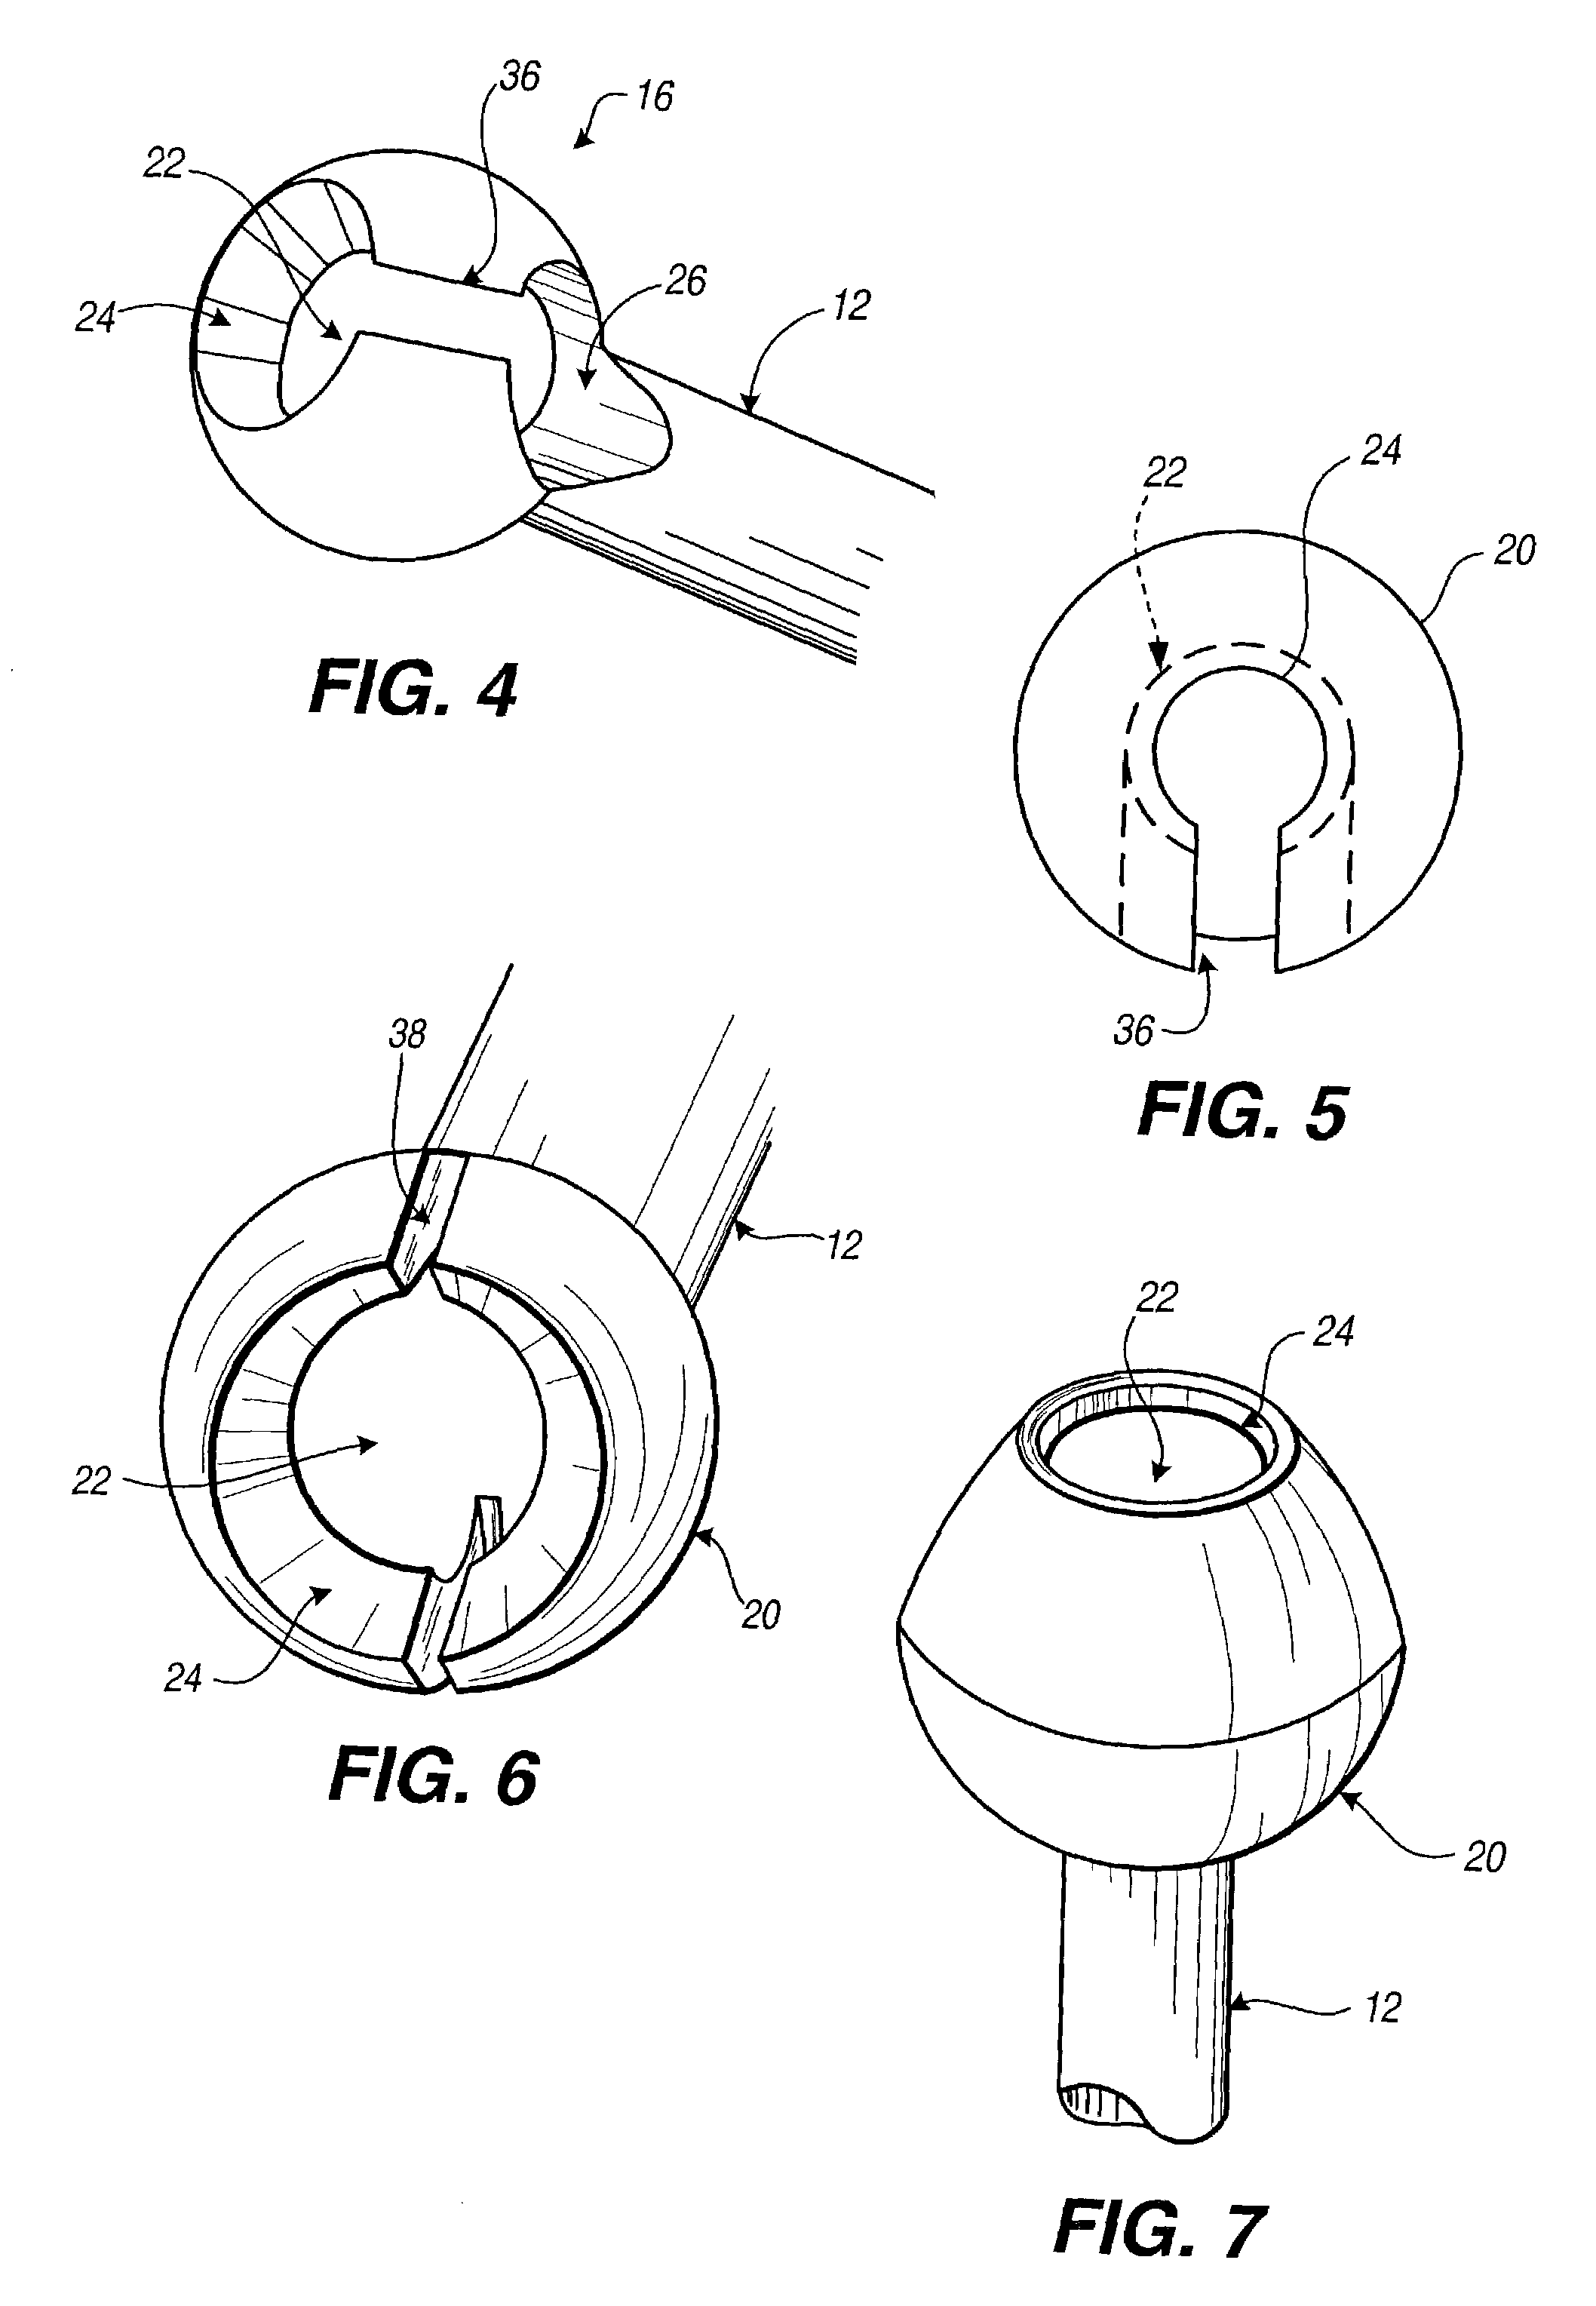 Connection rod for screw or hook polyaxial system and method of use